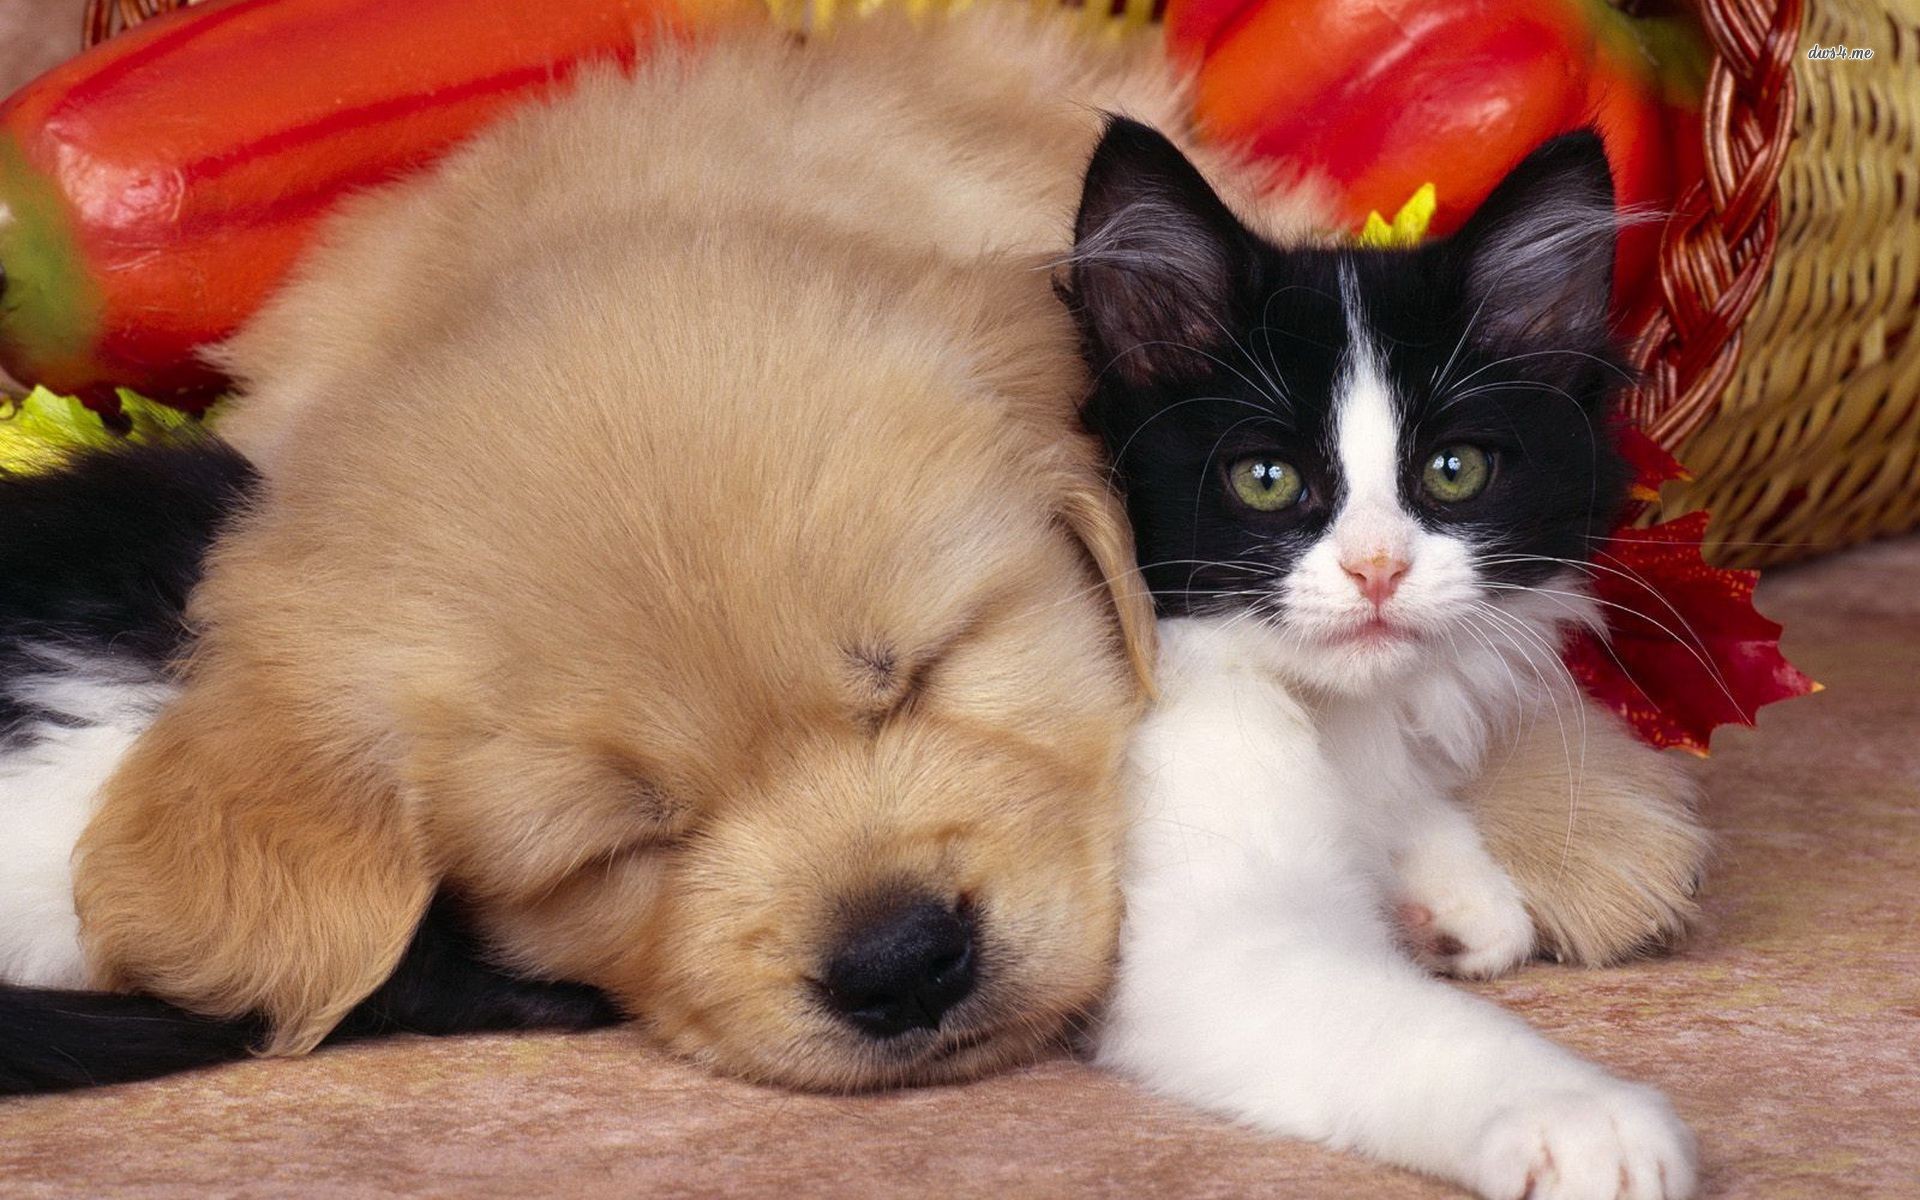 1920x1200 Cute Dog And Cat Hd Wallpaperjpg. Dogs And Cats Wallpaper .